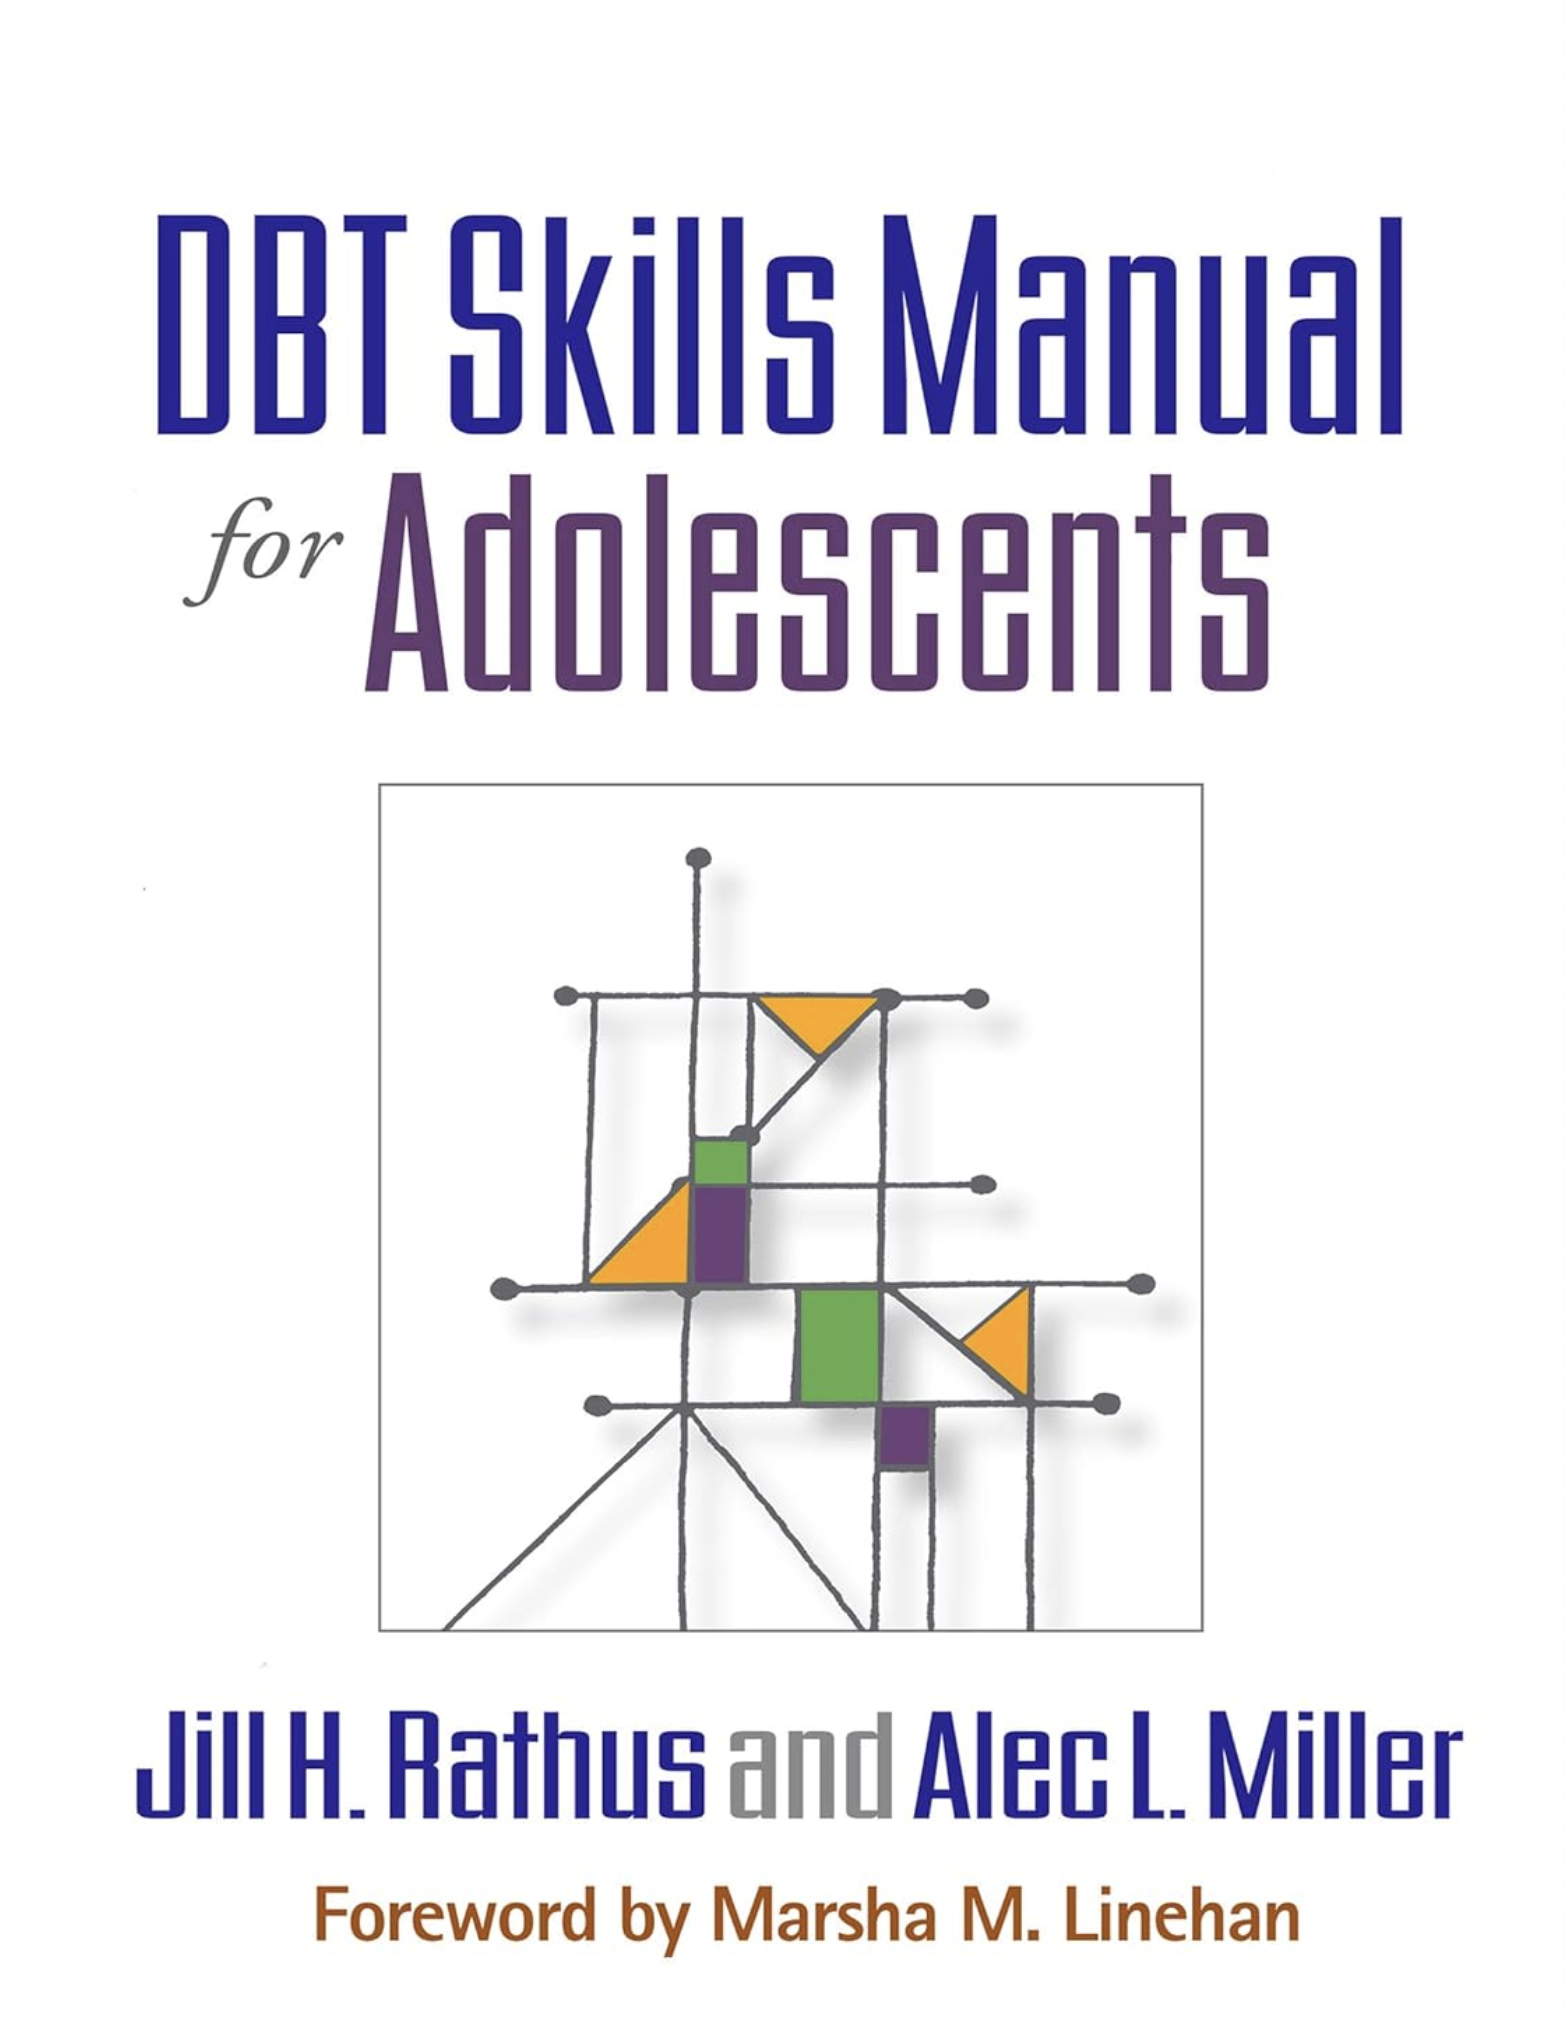 Book cover of "DBT Skills Manual for Adolescents"